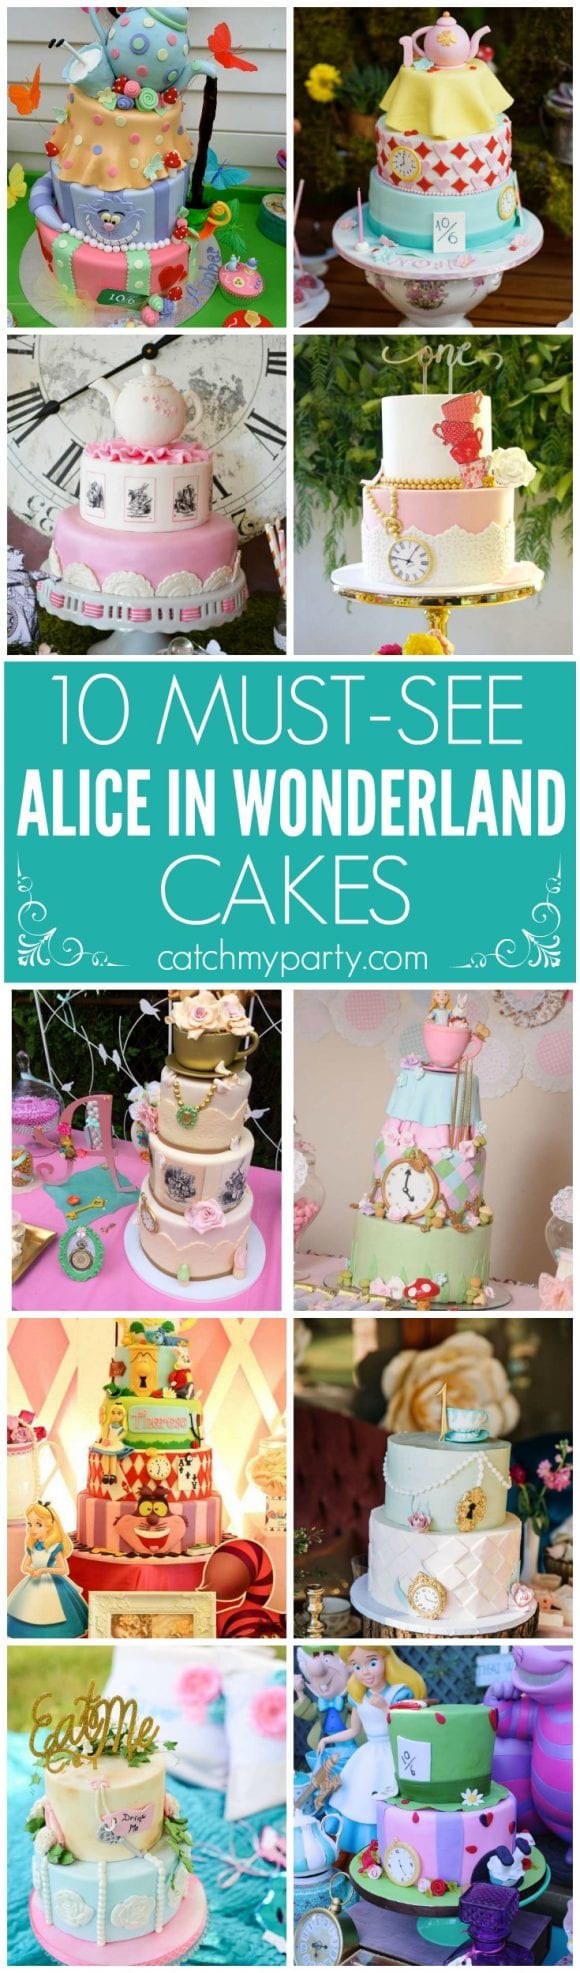 10 Must-See Alice in Wonderland Cakes | Catchmyparty.com